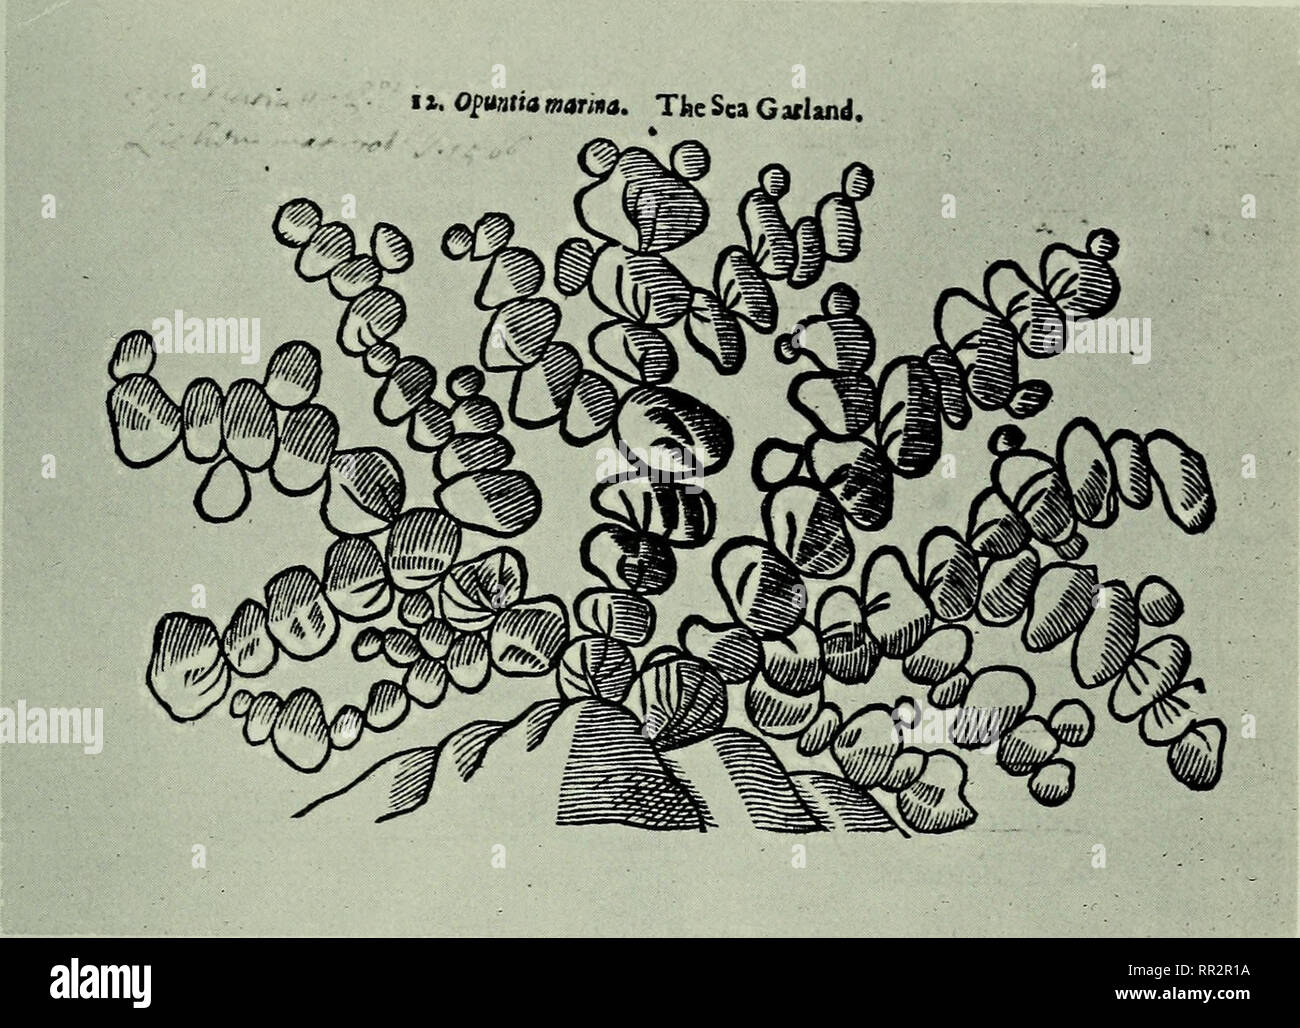 . Advances in marine biology: volume 17. Coral fisheries. ECOLOGY AND TAXONOMY OF Halimeda. Fig. 1. Halimeda tuna, as Opuntia marina in Parkinson's &quot;Theatrum Botanicum&quot;, 1640. (Photograph by the British Museum (Natural History).) The discovery of other species, in the intervening years, has shown that the genus is not always dainty and the descriptive terminology has grown accordingly. Nevertheless, the overall appearance of the genus is characteristic, and whether one first encounters it while swimming in a coral reef, or examining an array of dried herbarium specimens, it can be id Stock Photo